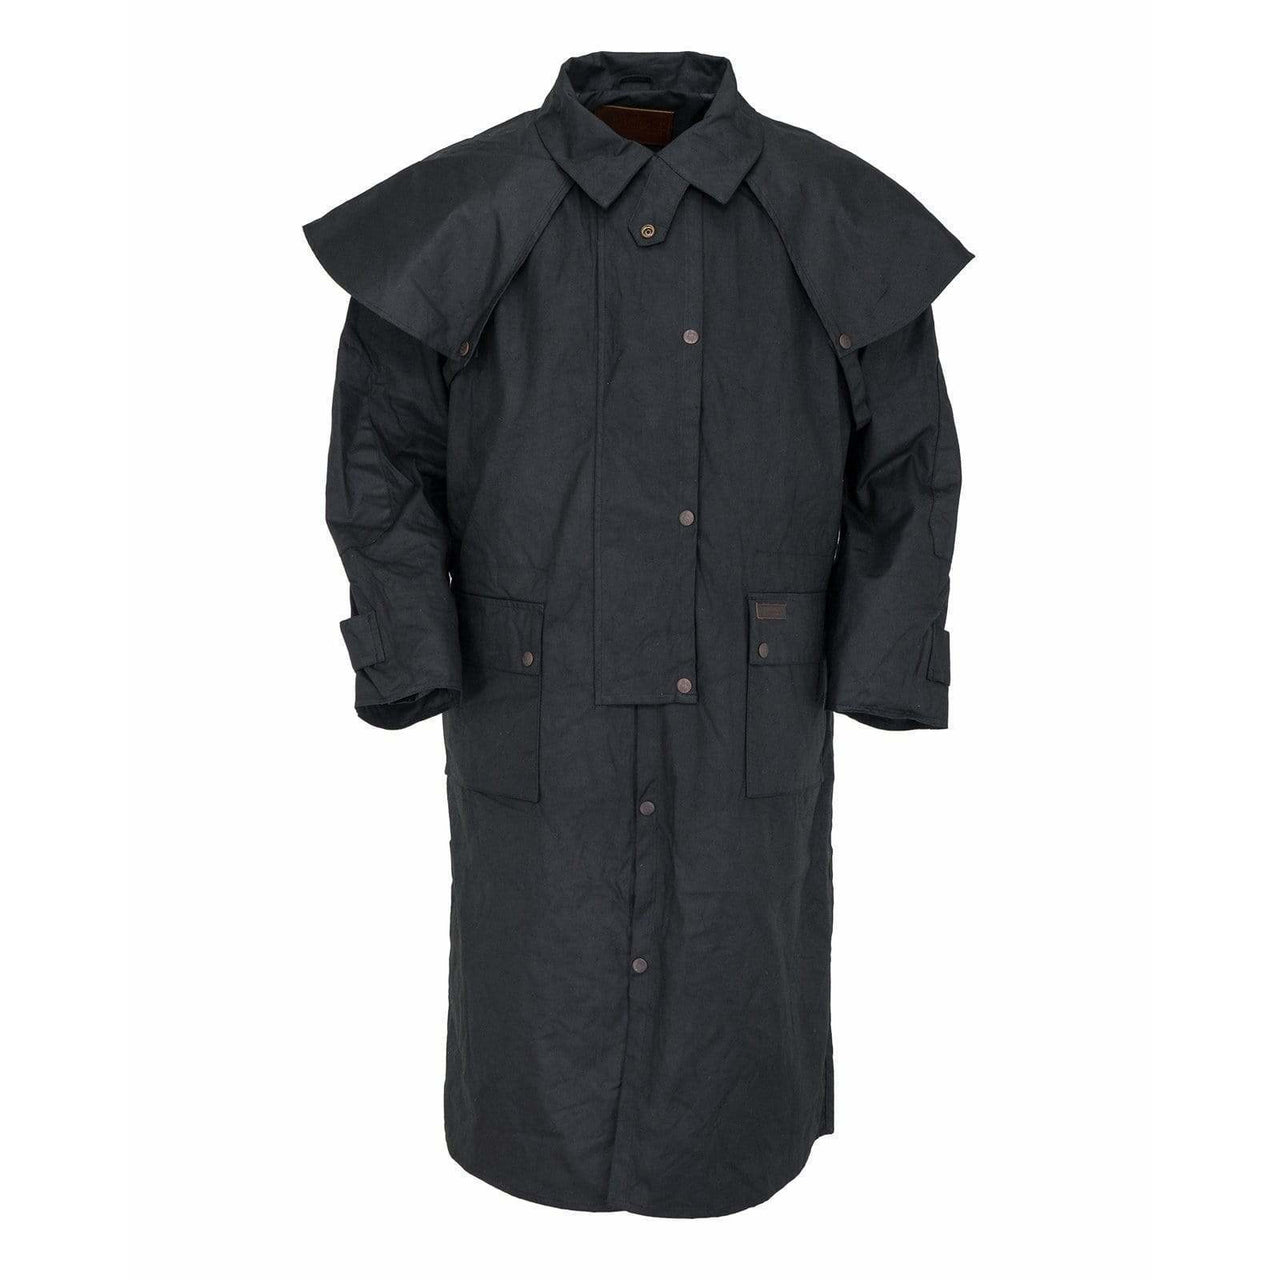 Outback Men's Low Rider Duster Jacket